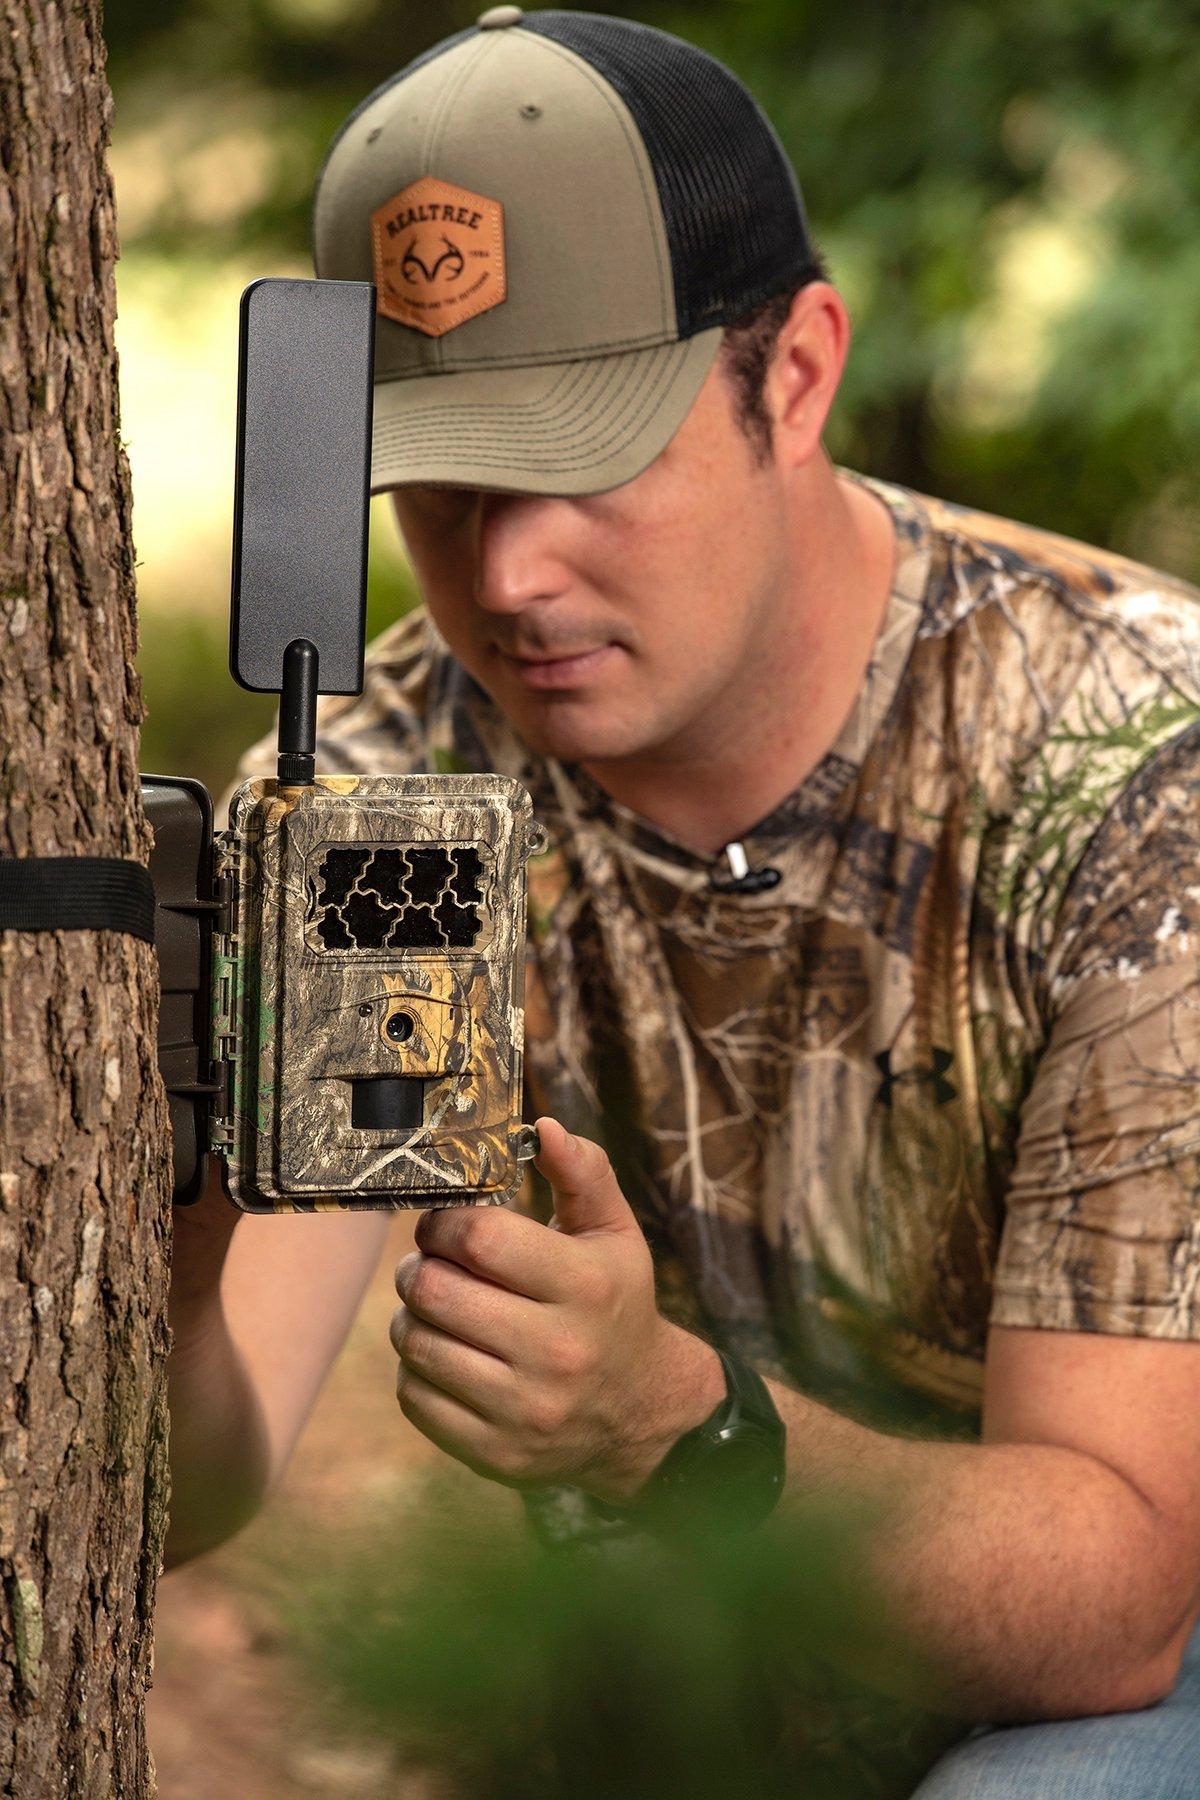 Cellular trail cameras are loved by most hunters, but some states are bringing ethics into the discussion. Image by Whitetail TV / Spartan 